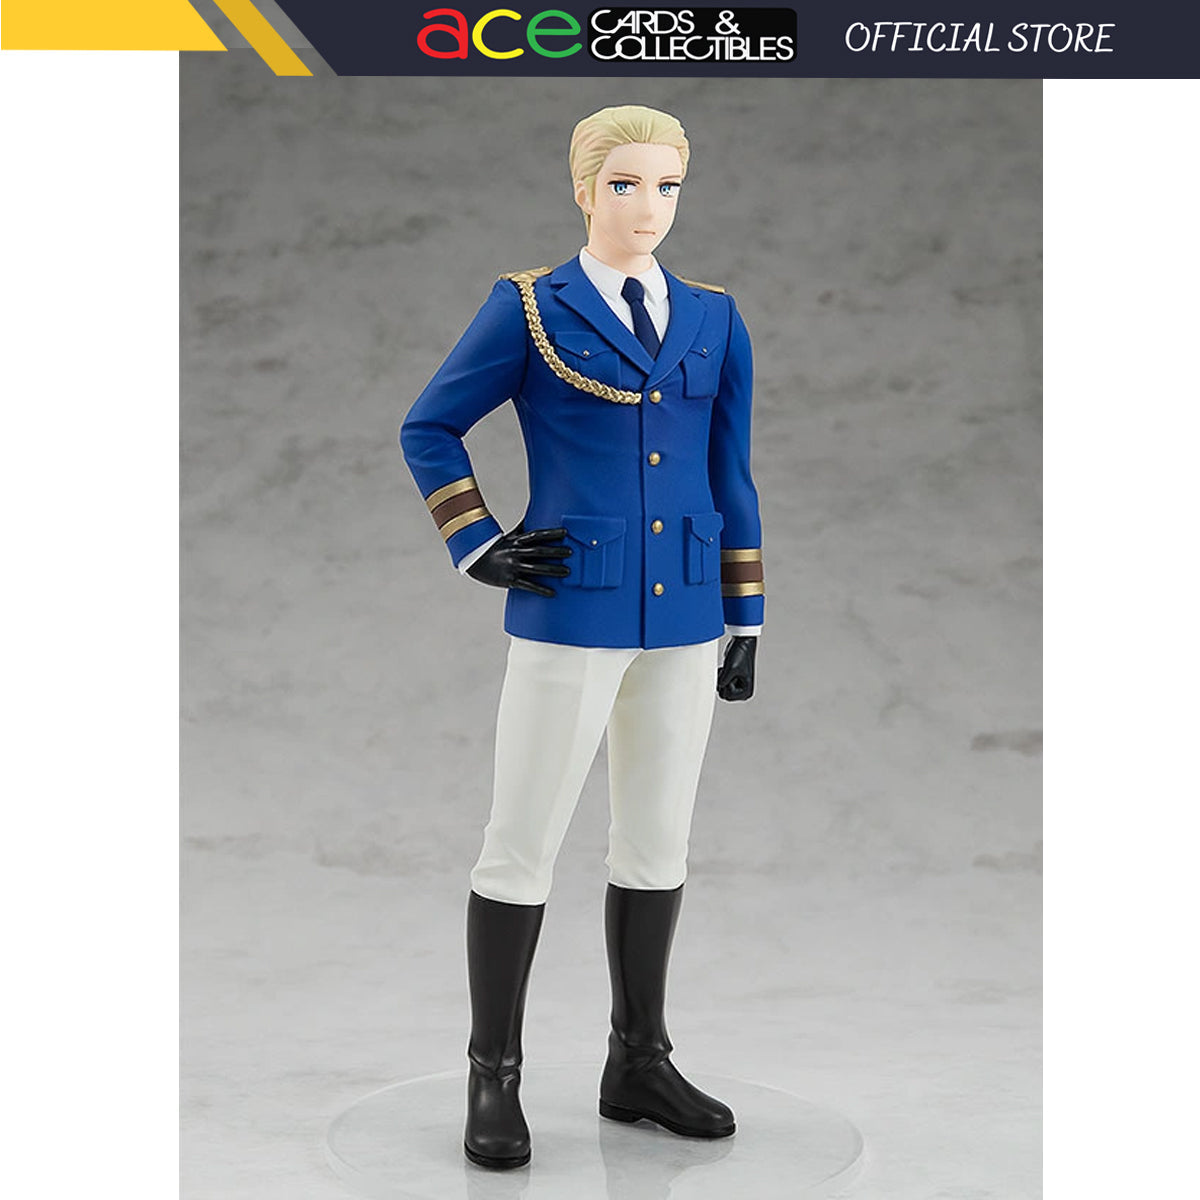 POP UP Parade Darling in The Frankis Zero 2, Non-Scale, Plastic,  Pre-Painted Complete Figure